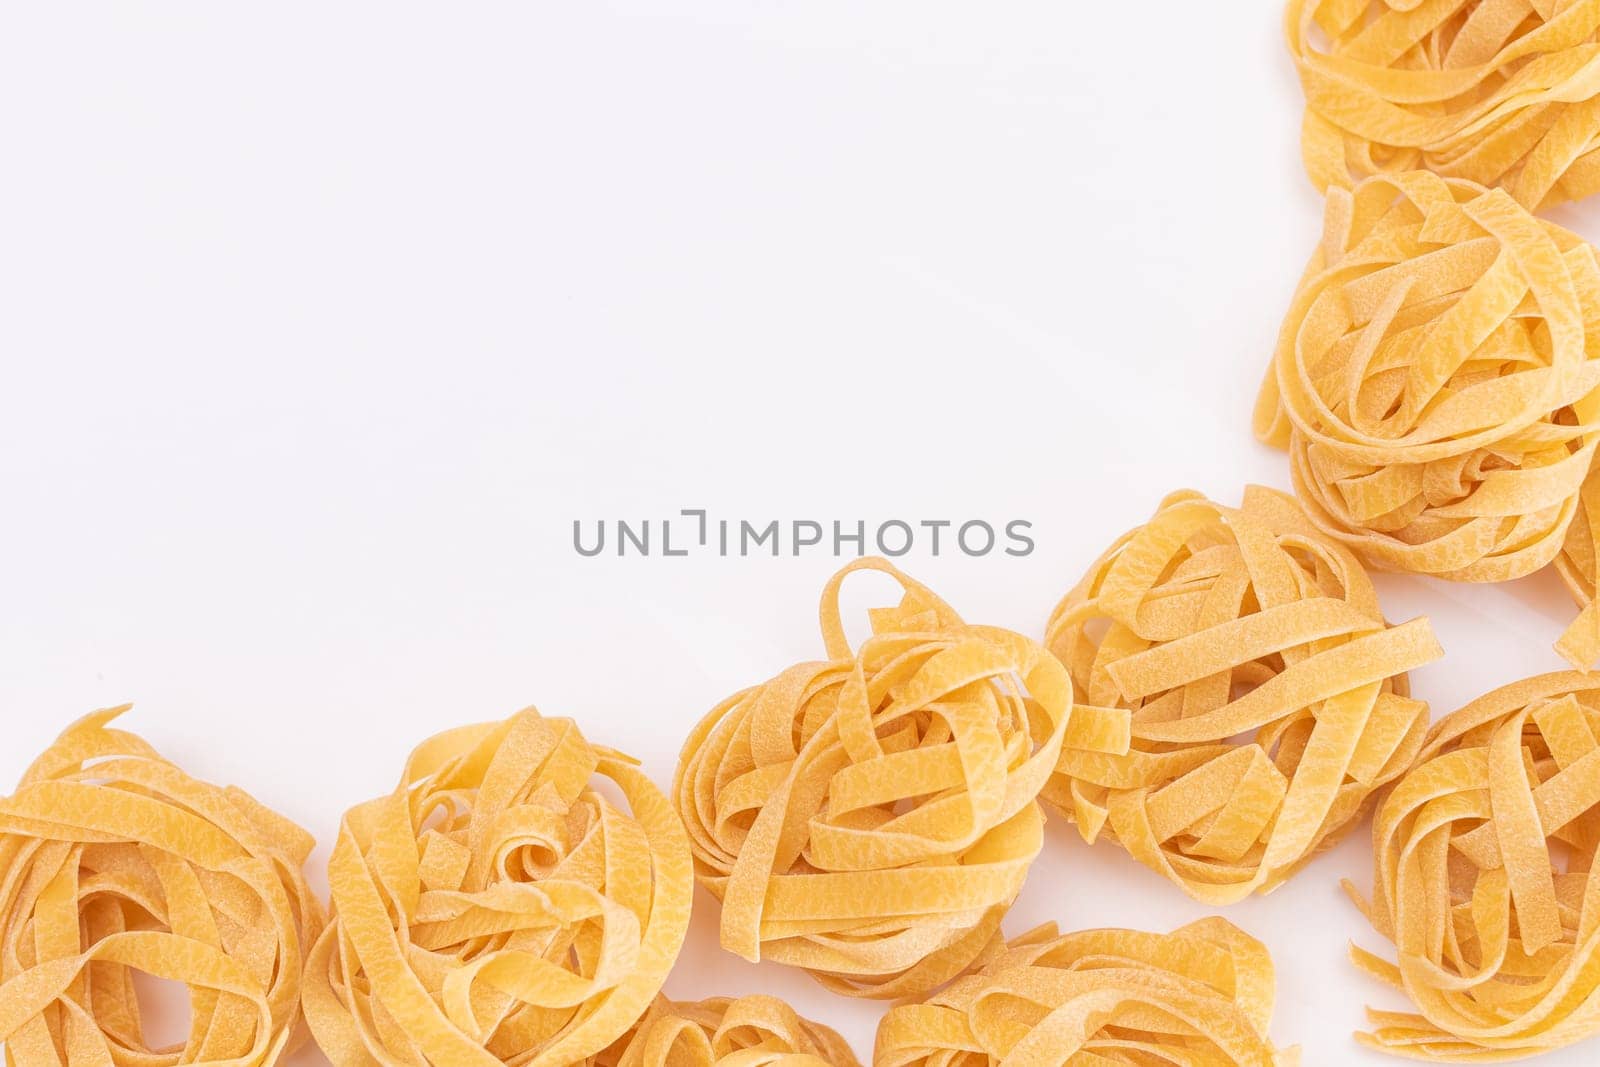 Classic Italian Raw Egg Fettuccine with Copy Spase on White Background. Dry Twisted Uncooked Pasta. Italian Culture and Cuisine. Raw Golden Macaroni Pattern